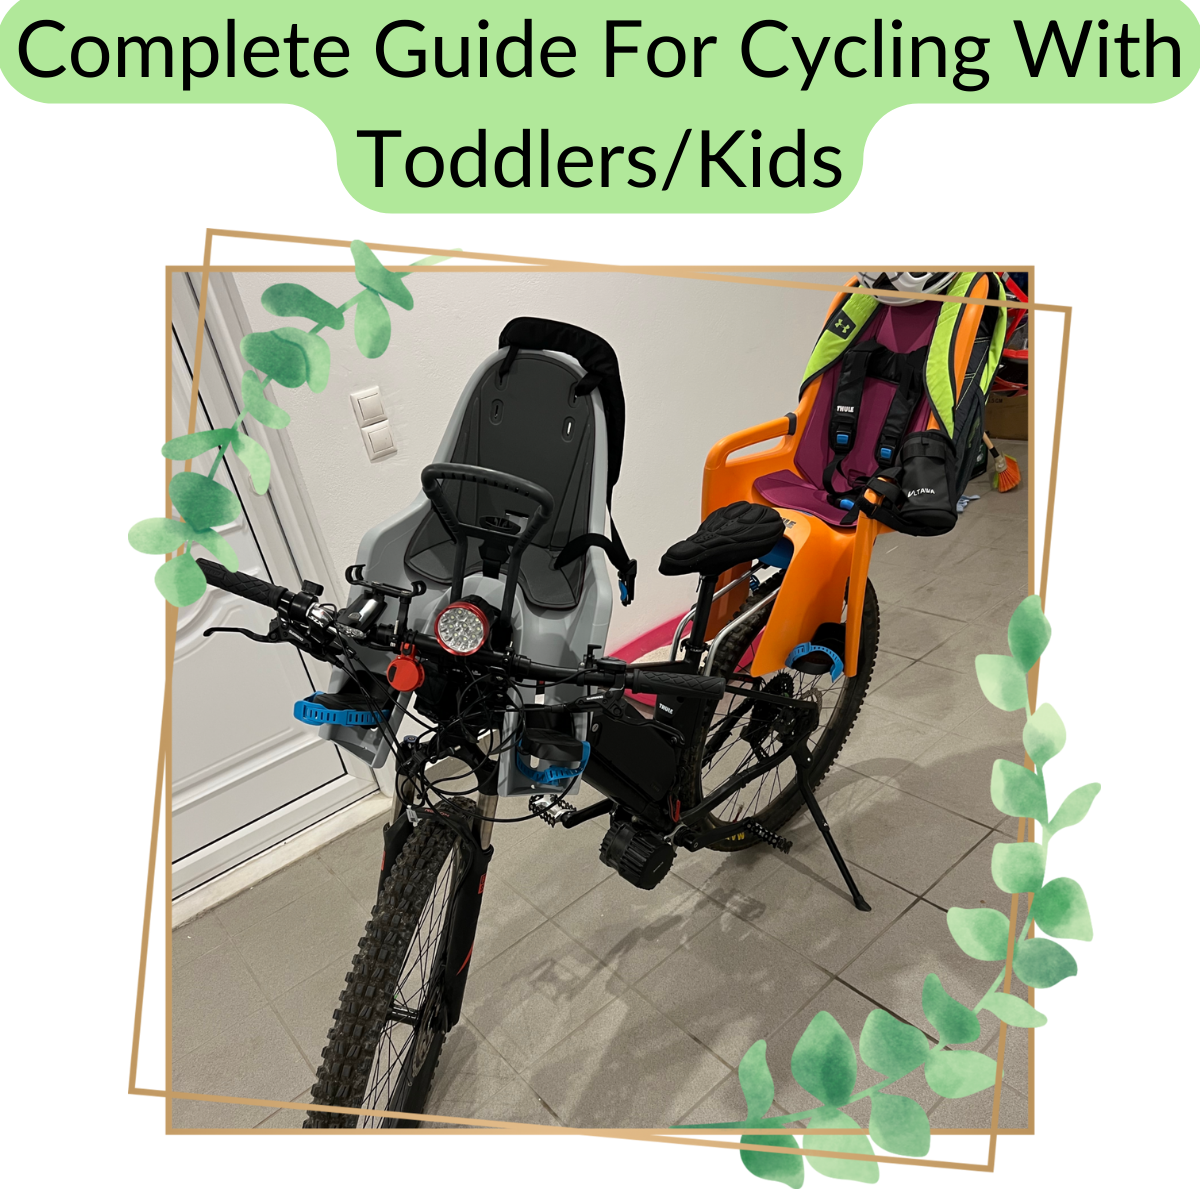 Complete Guide For Cycling With Toddlers/Kids